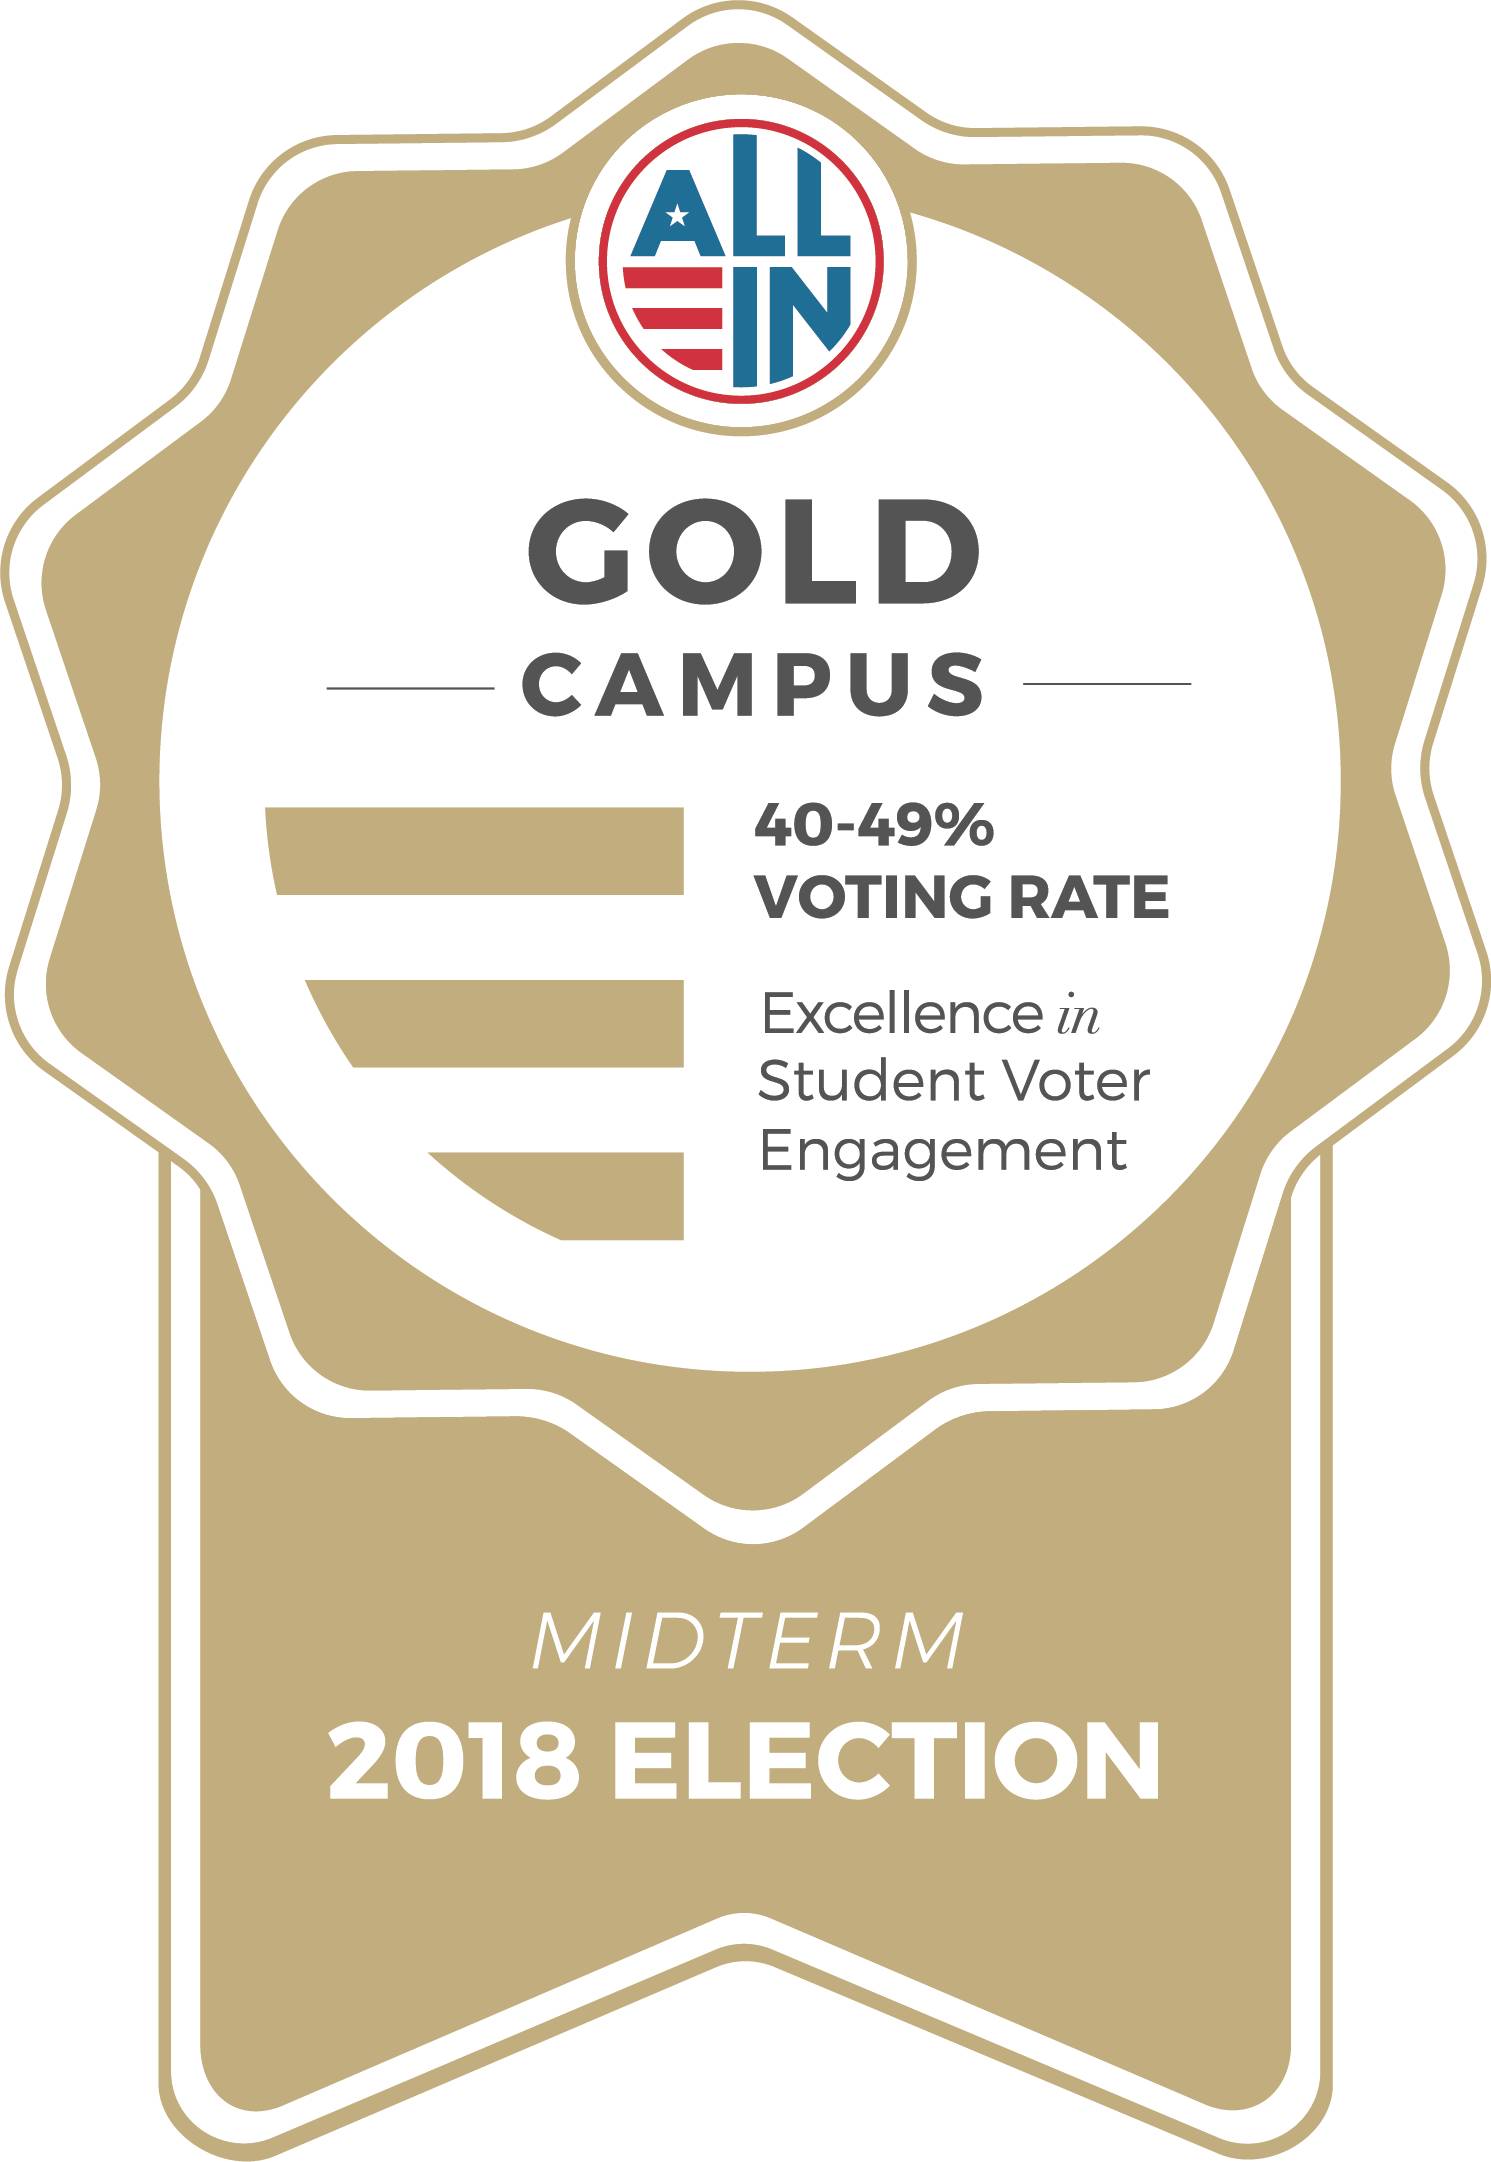 Gold ribbon graphic that reads "All In: Gold Campus. 40-49% voting rate. Excellence in Student Voter Engagement. Midterm 2018 Election.